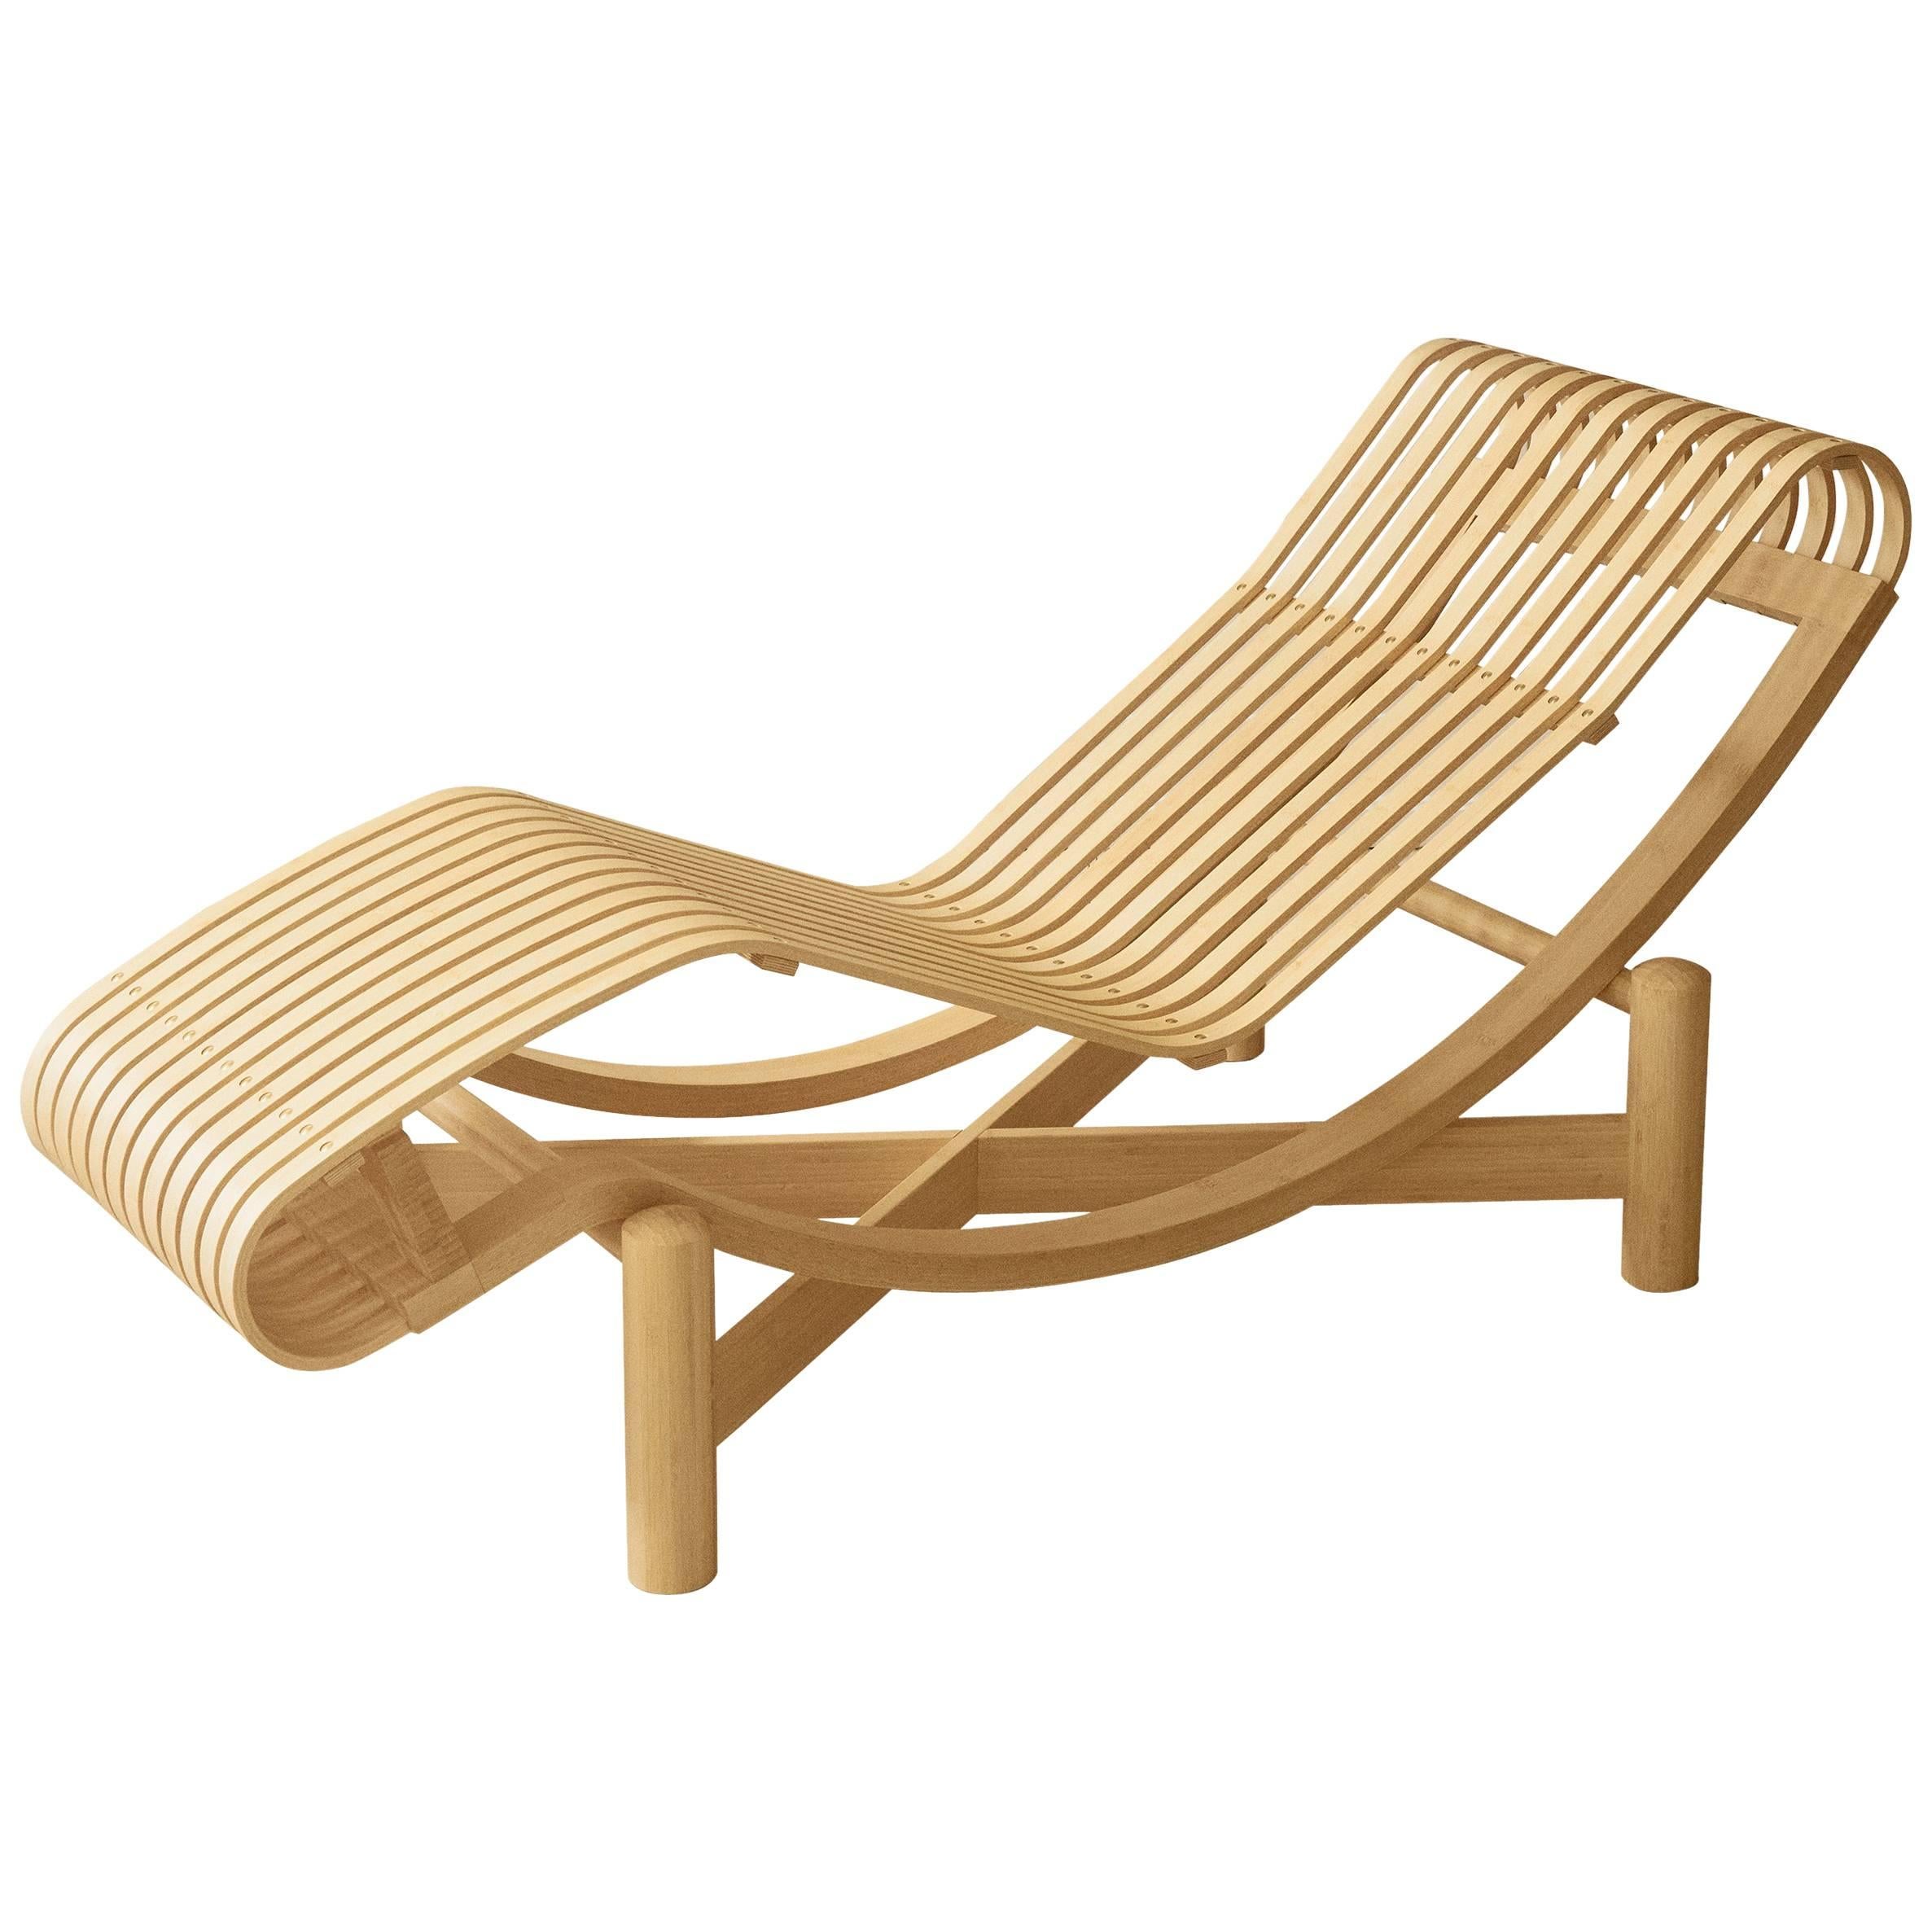 Charlotte Perriand Tokyo Chaise Longue